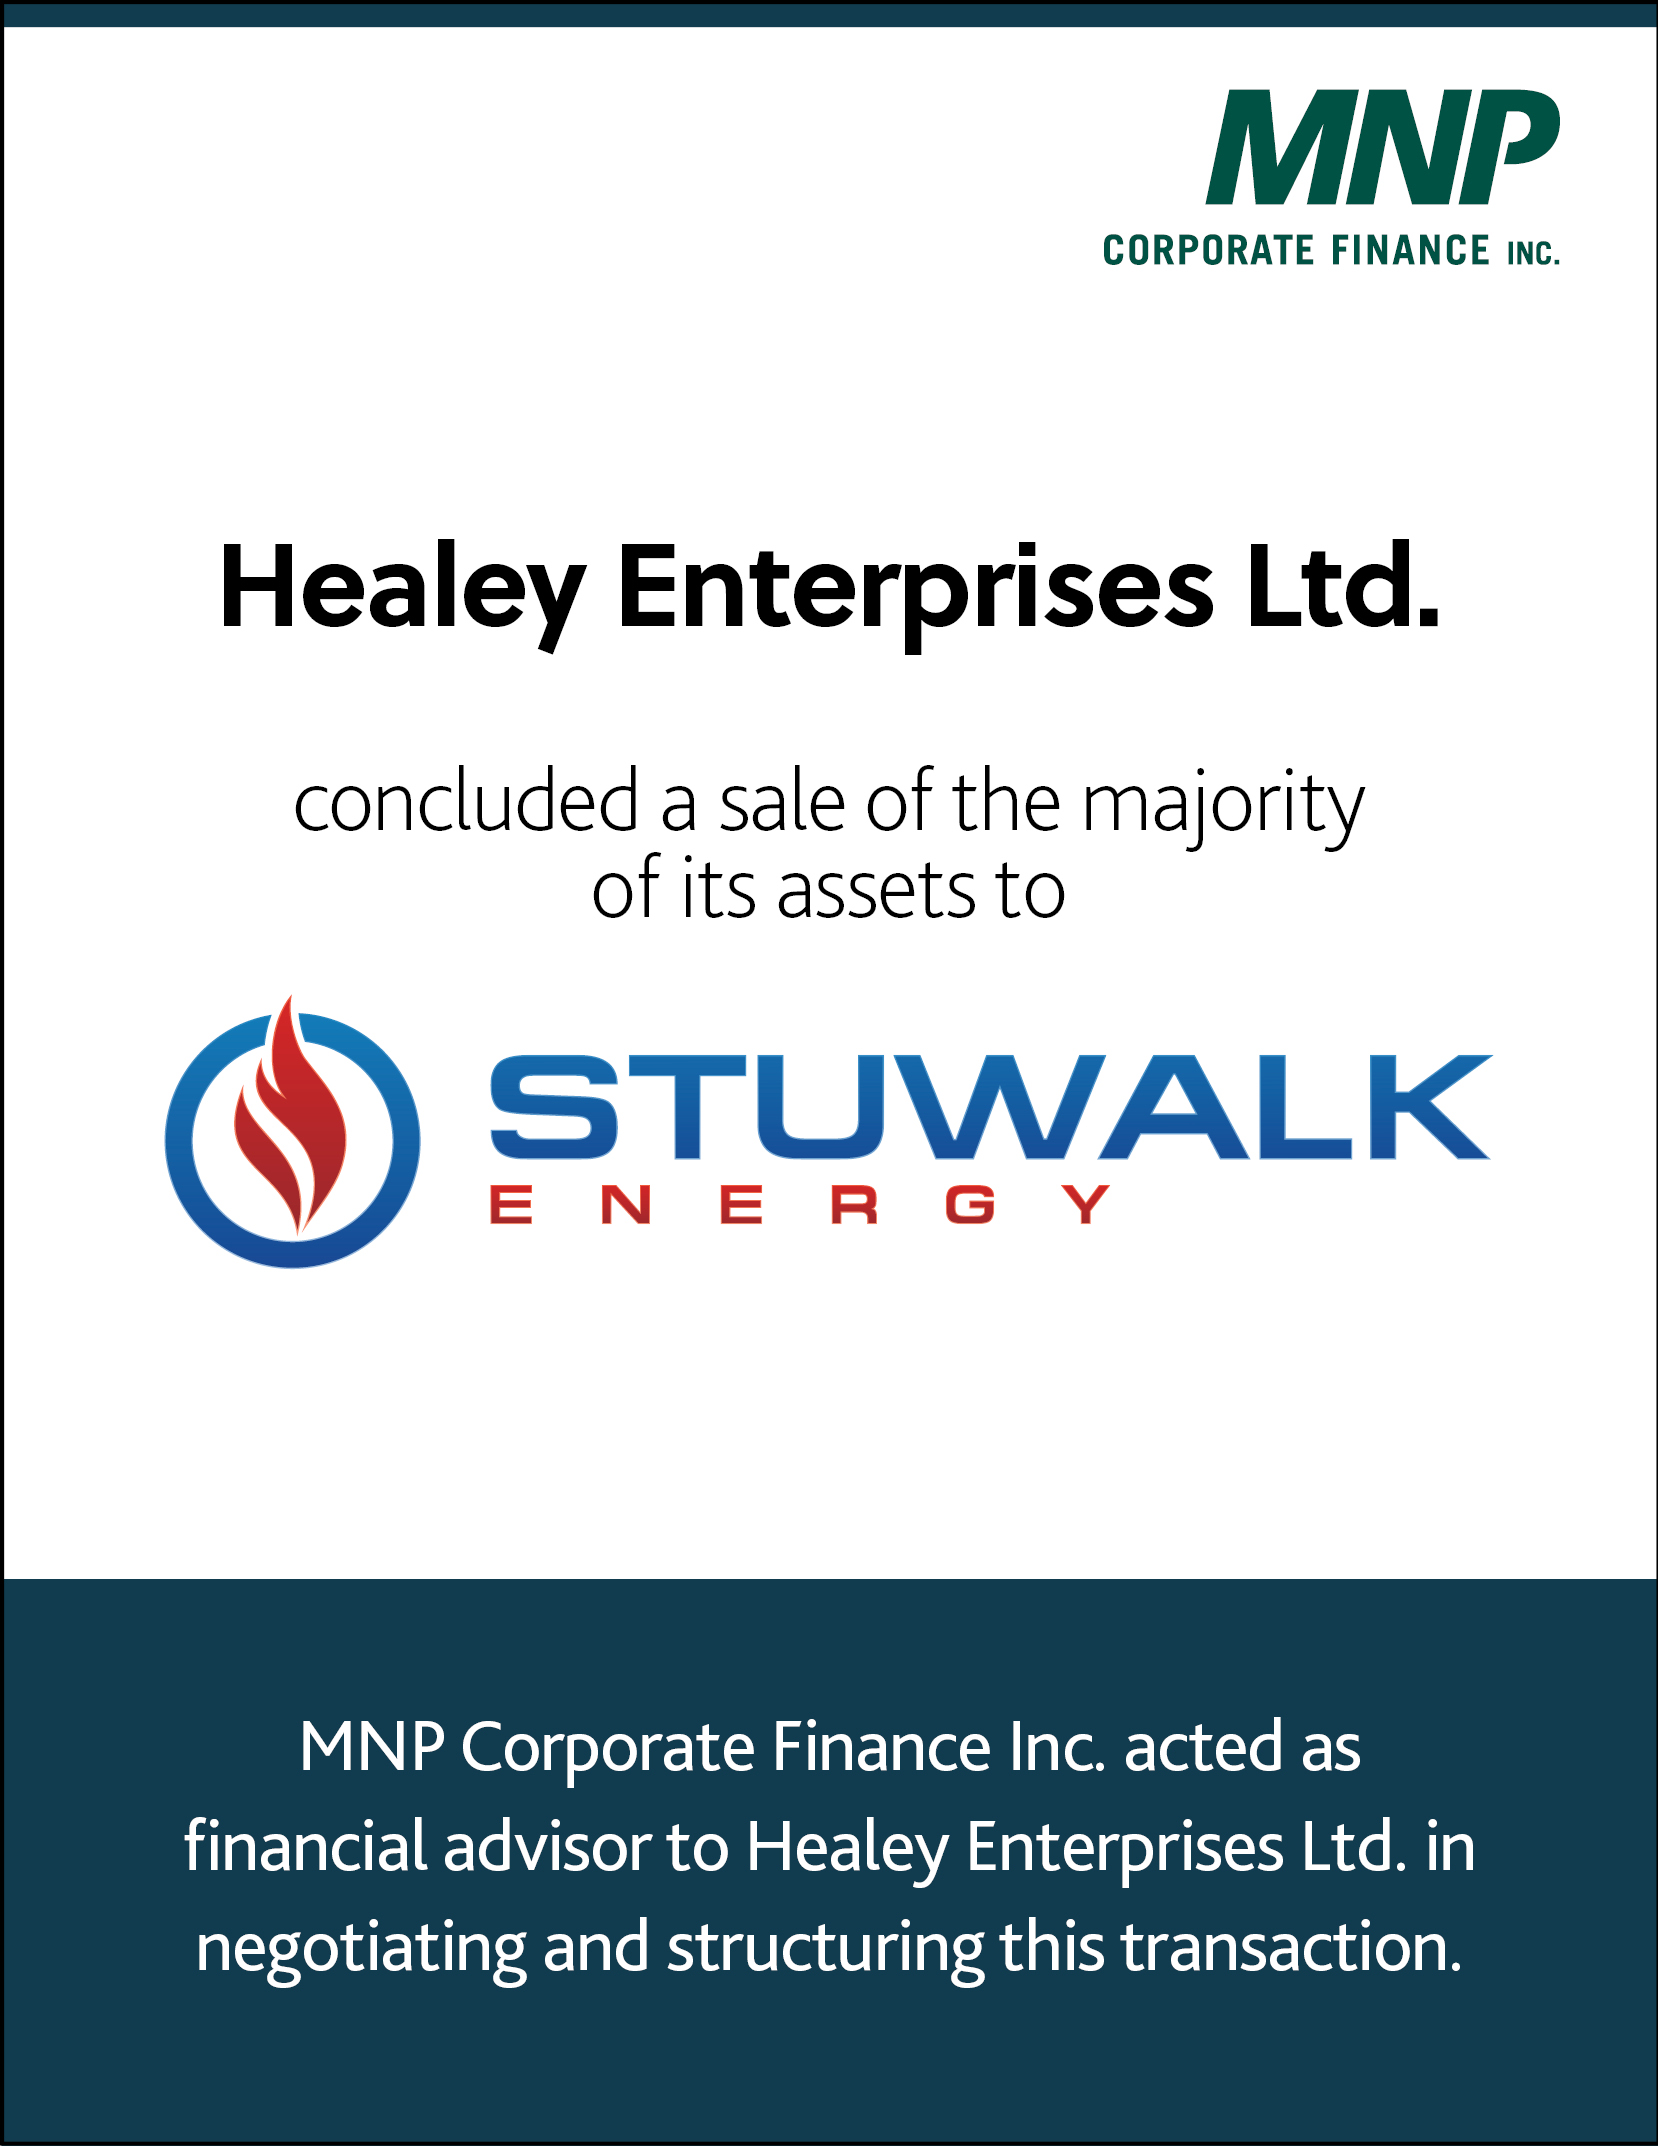 Healey Enterprises Ltd concluded a sale of the majority of its assets to Stuwalk energy 